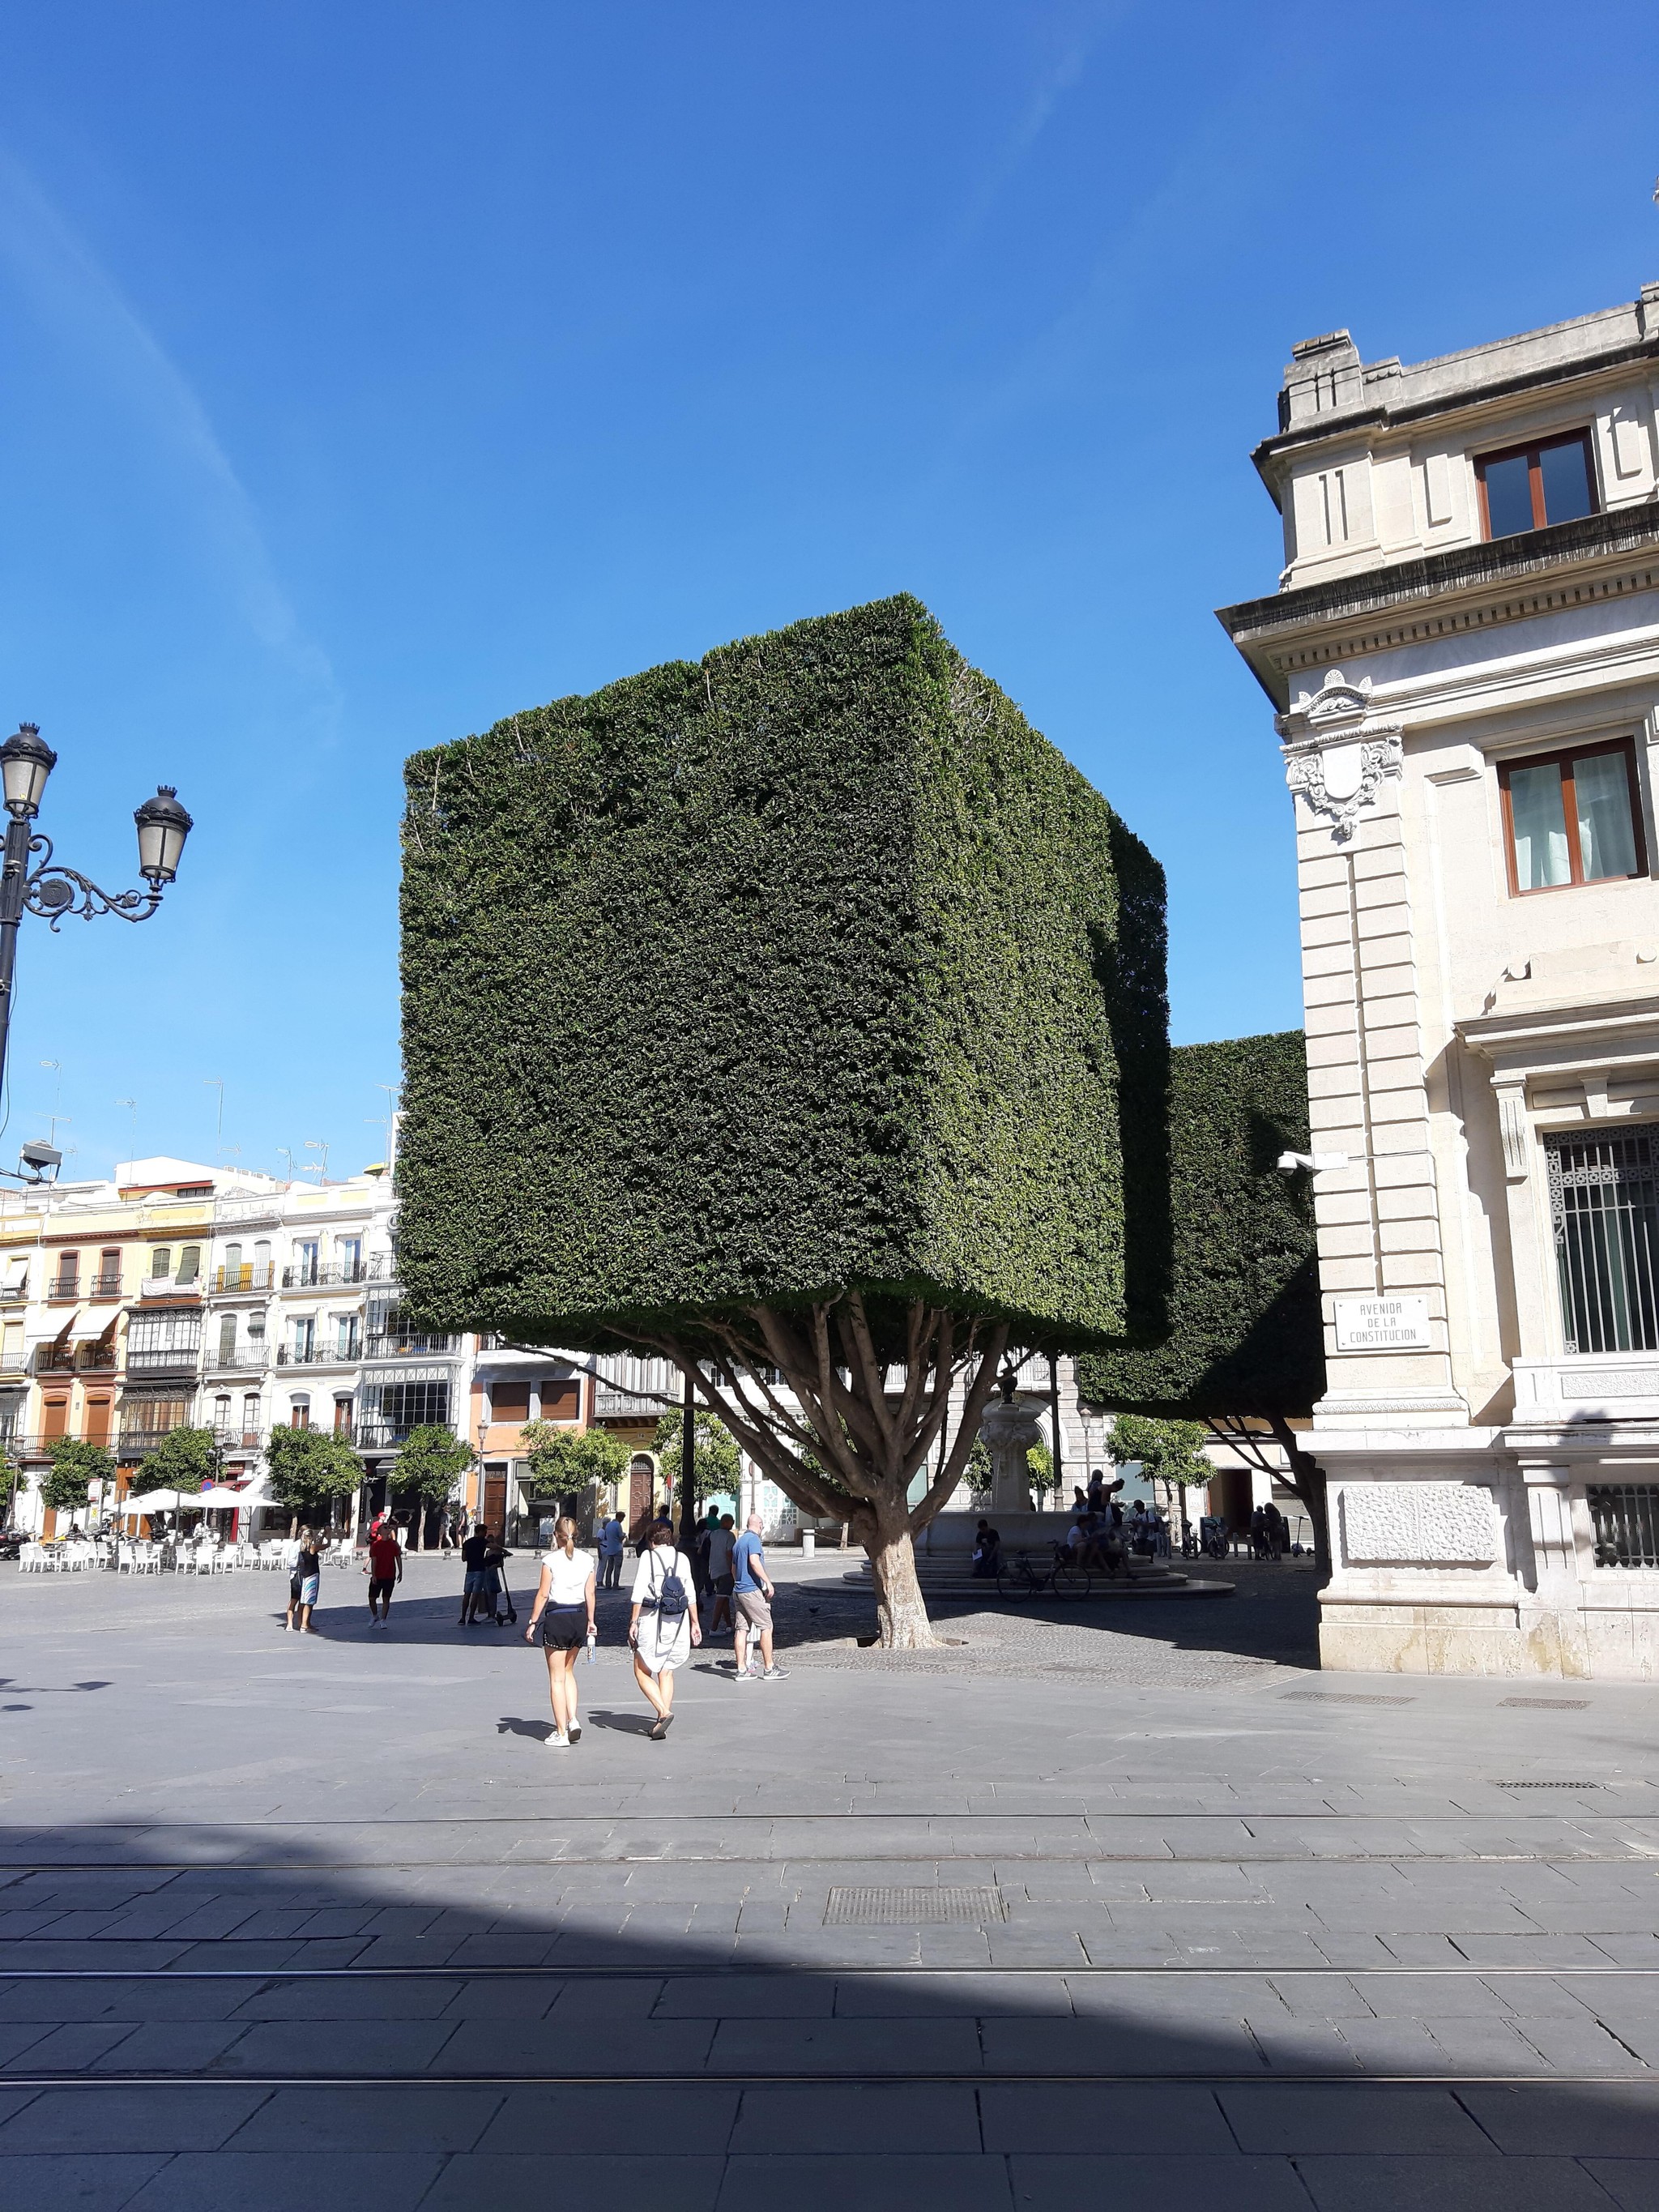 This is a perfect square tree in Seville, Spain - Spain, The photo, beauty, beauty of nature, Nature, Tree